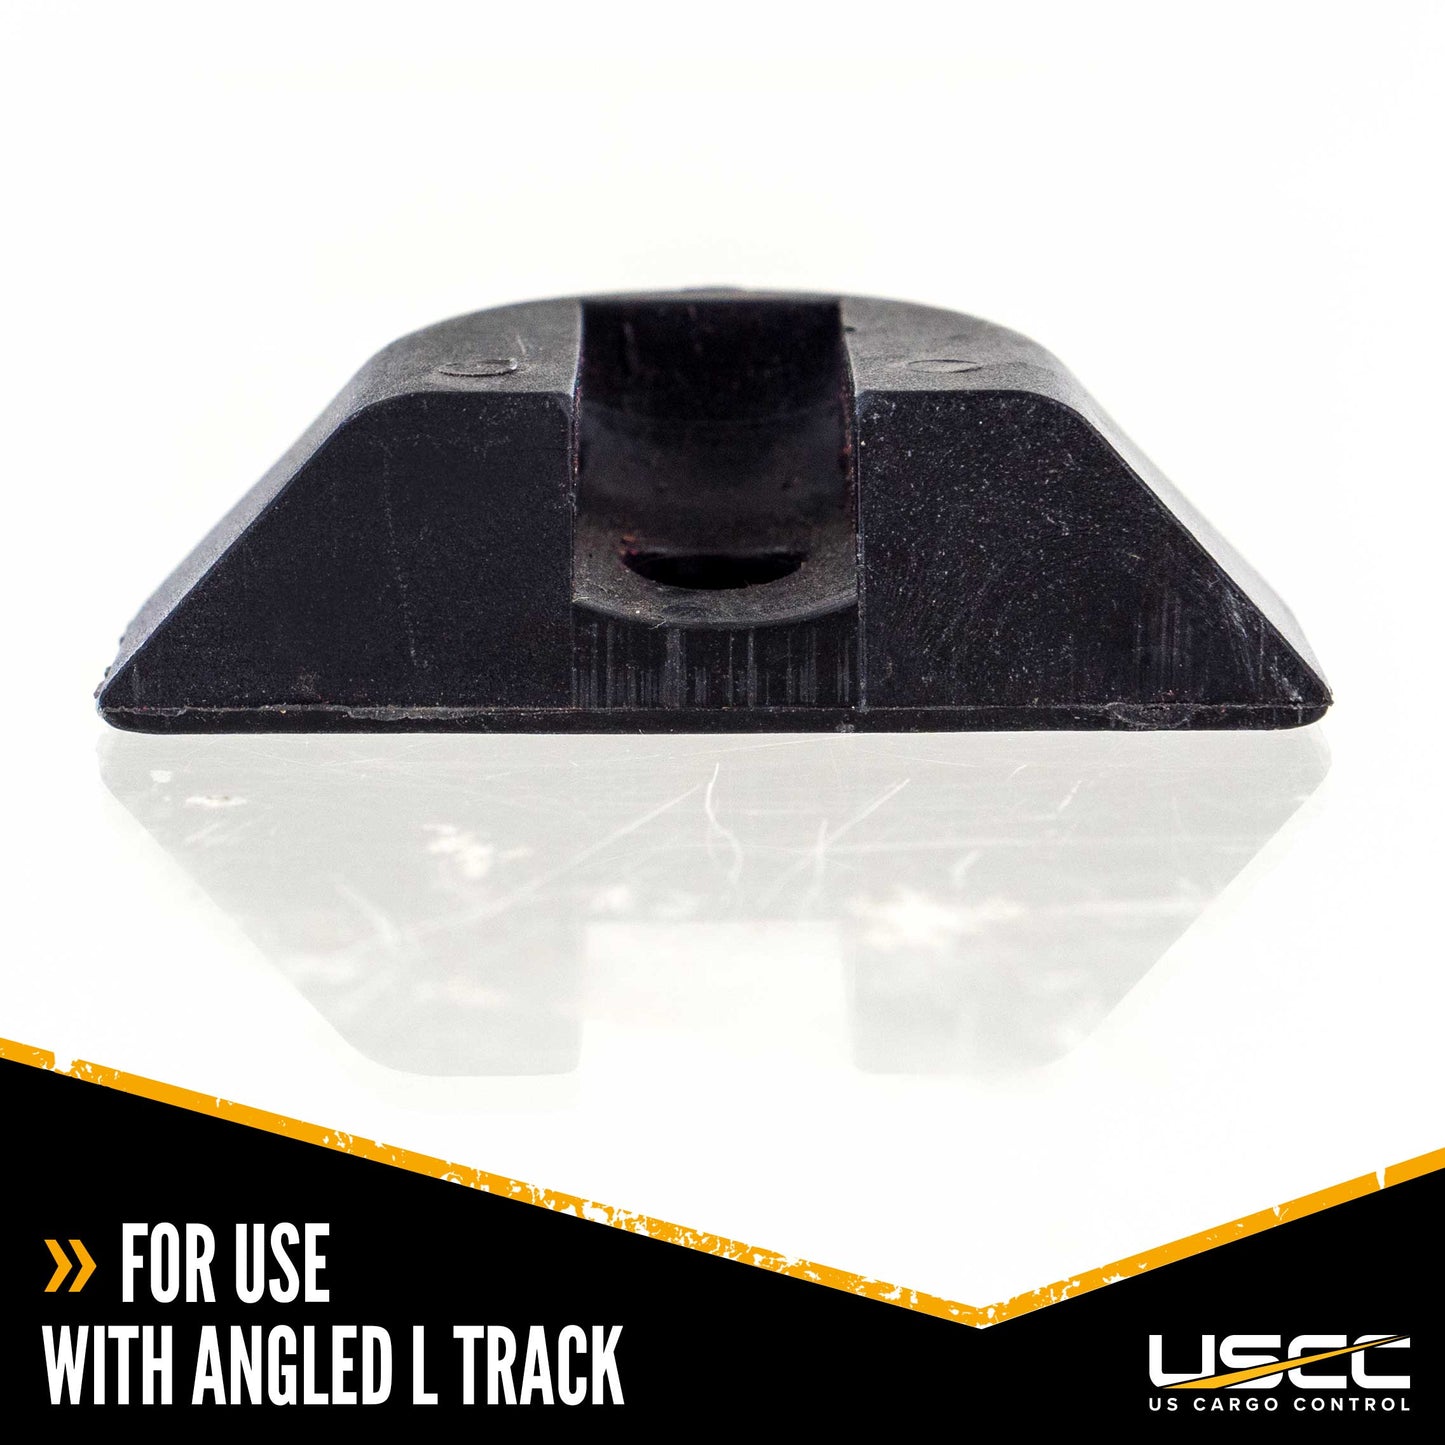 Angled End Cap for AirlineStyle LTrack image 3 of 7